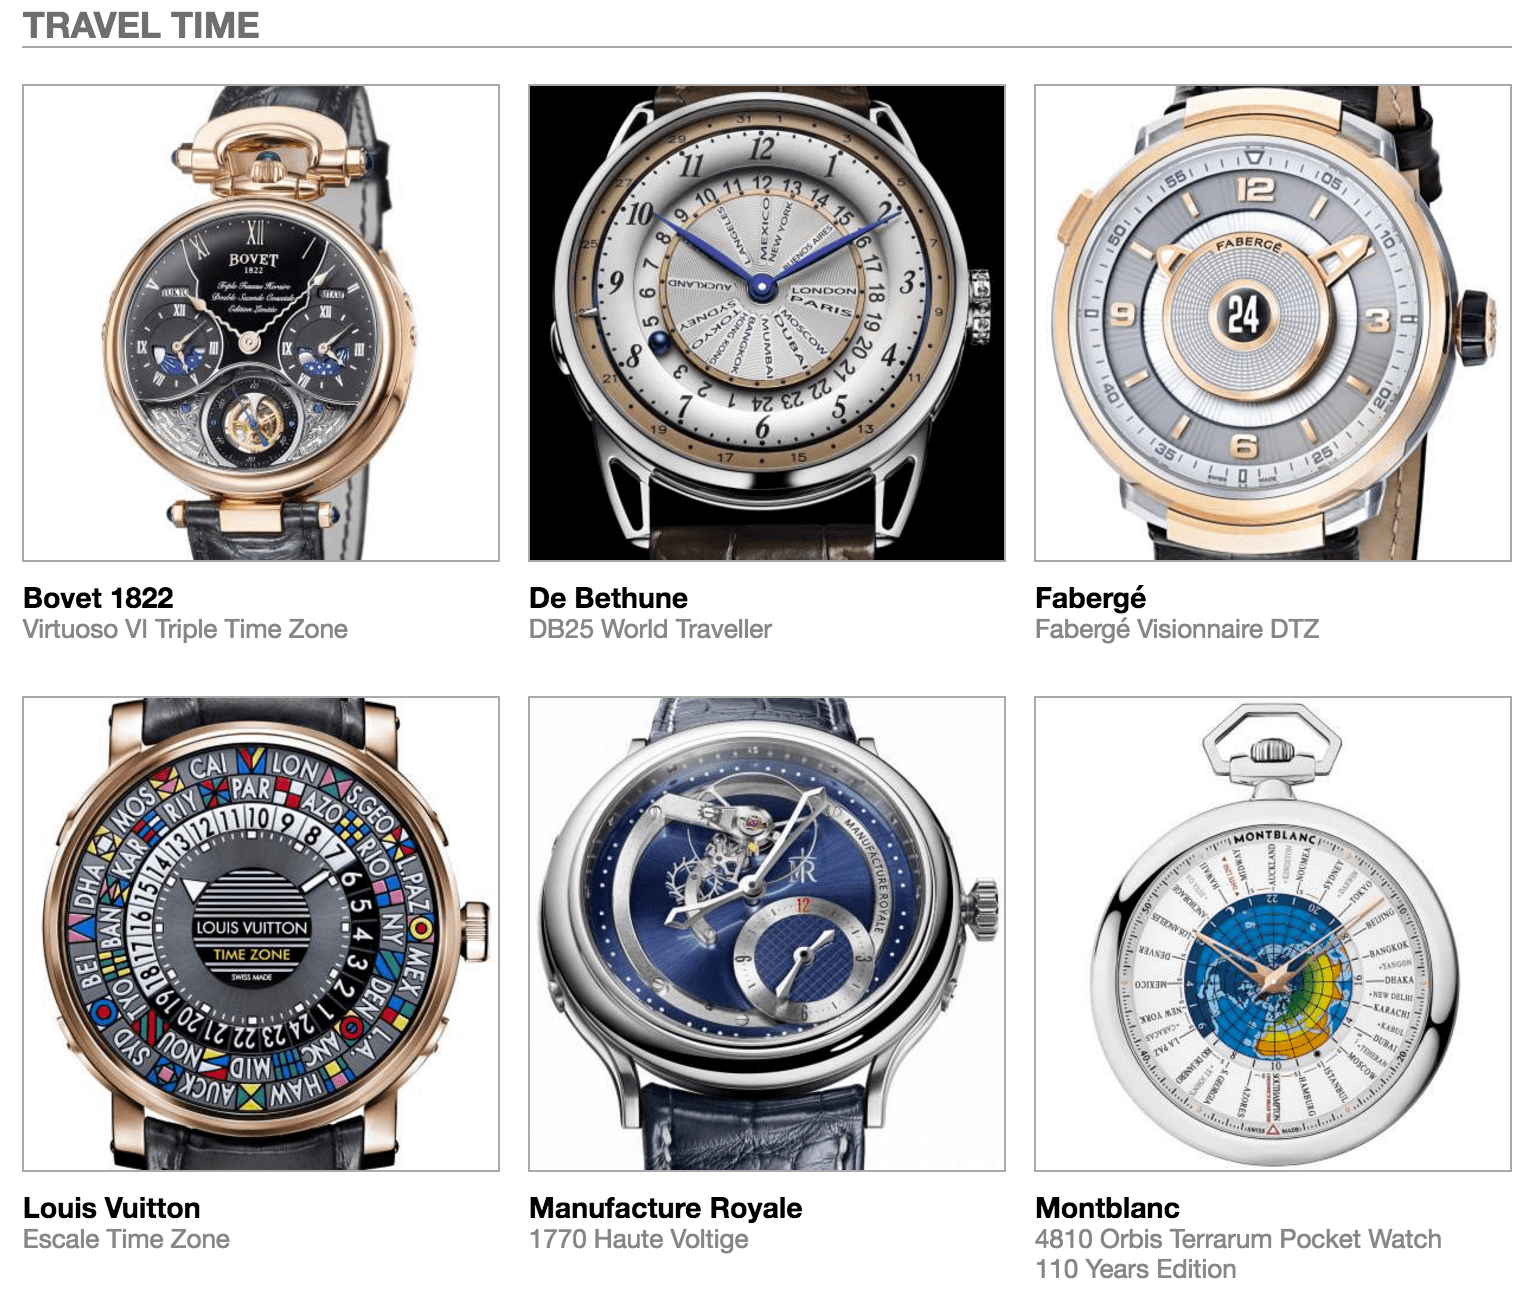 Pre-selected Travel Time watches in the 2016 GPHG